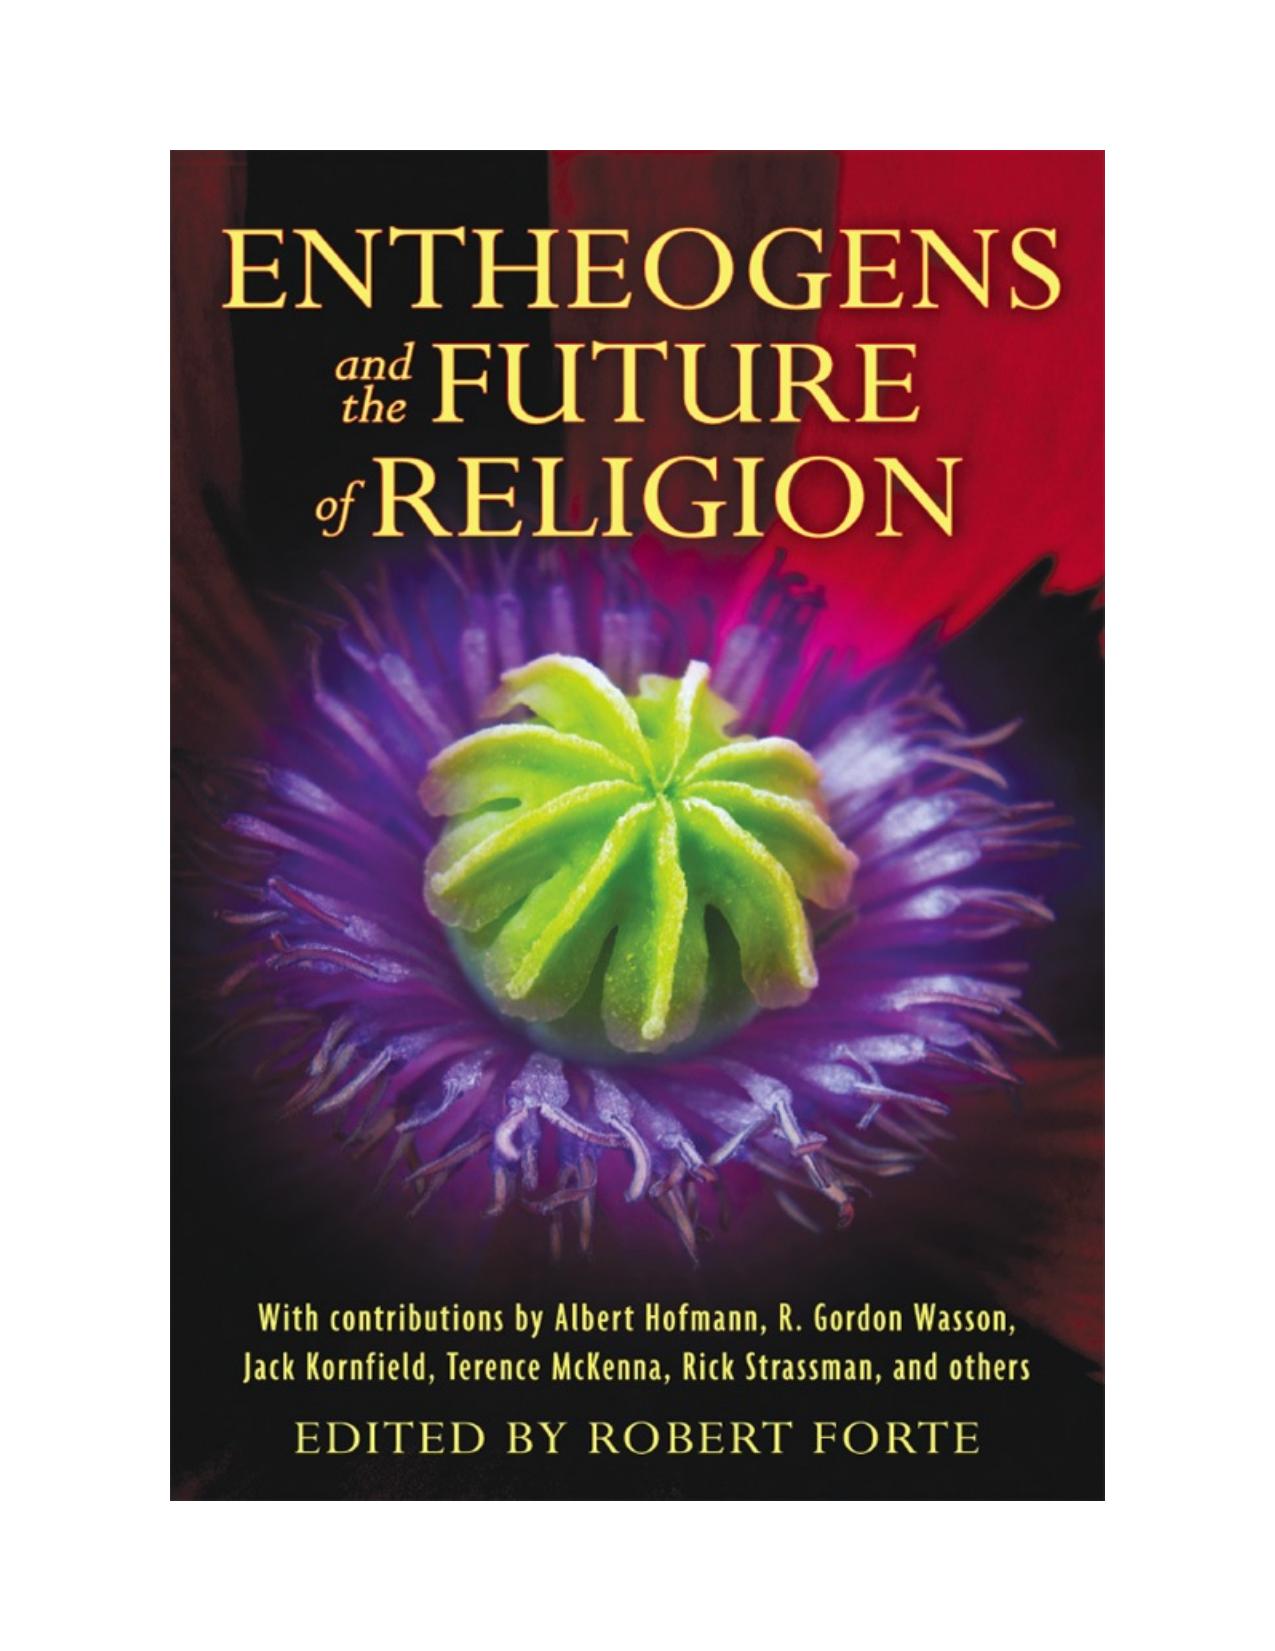 Entheogens and the Future of Religion - PDFDrive.com